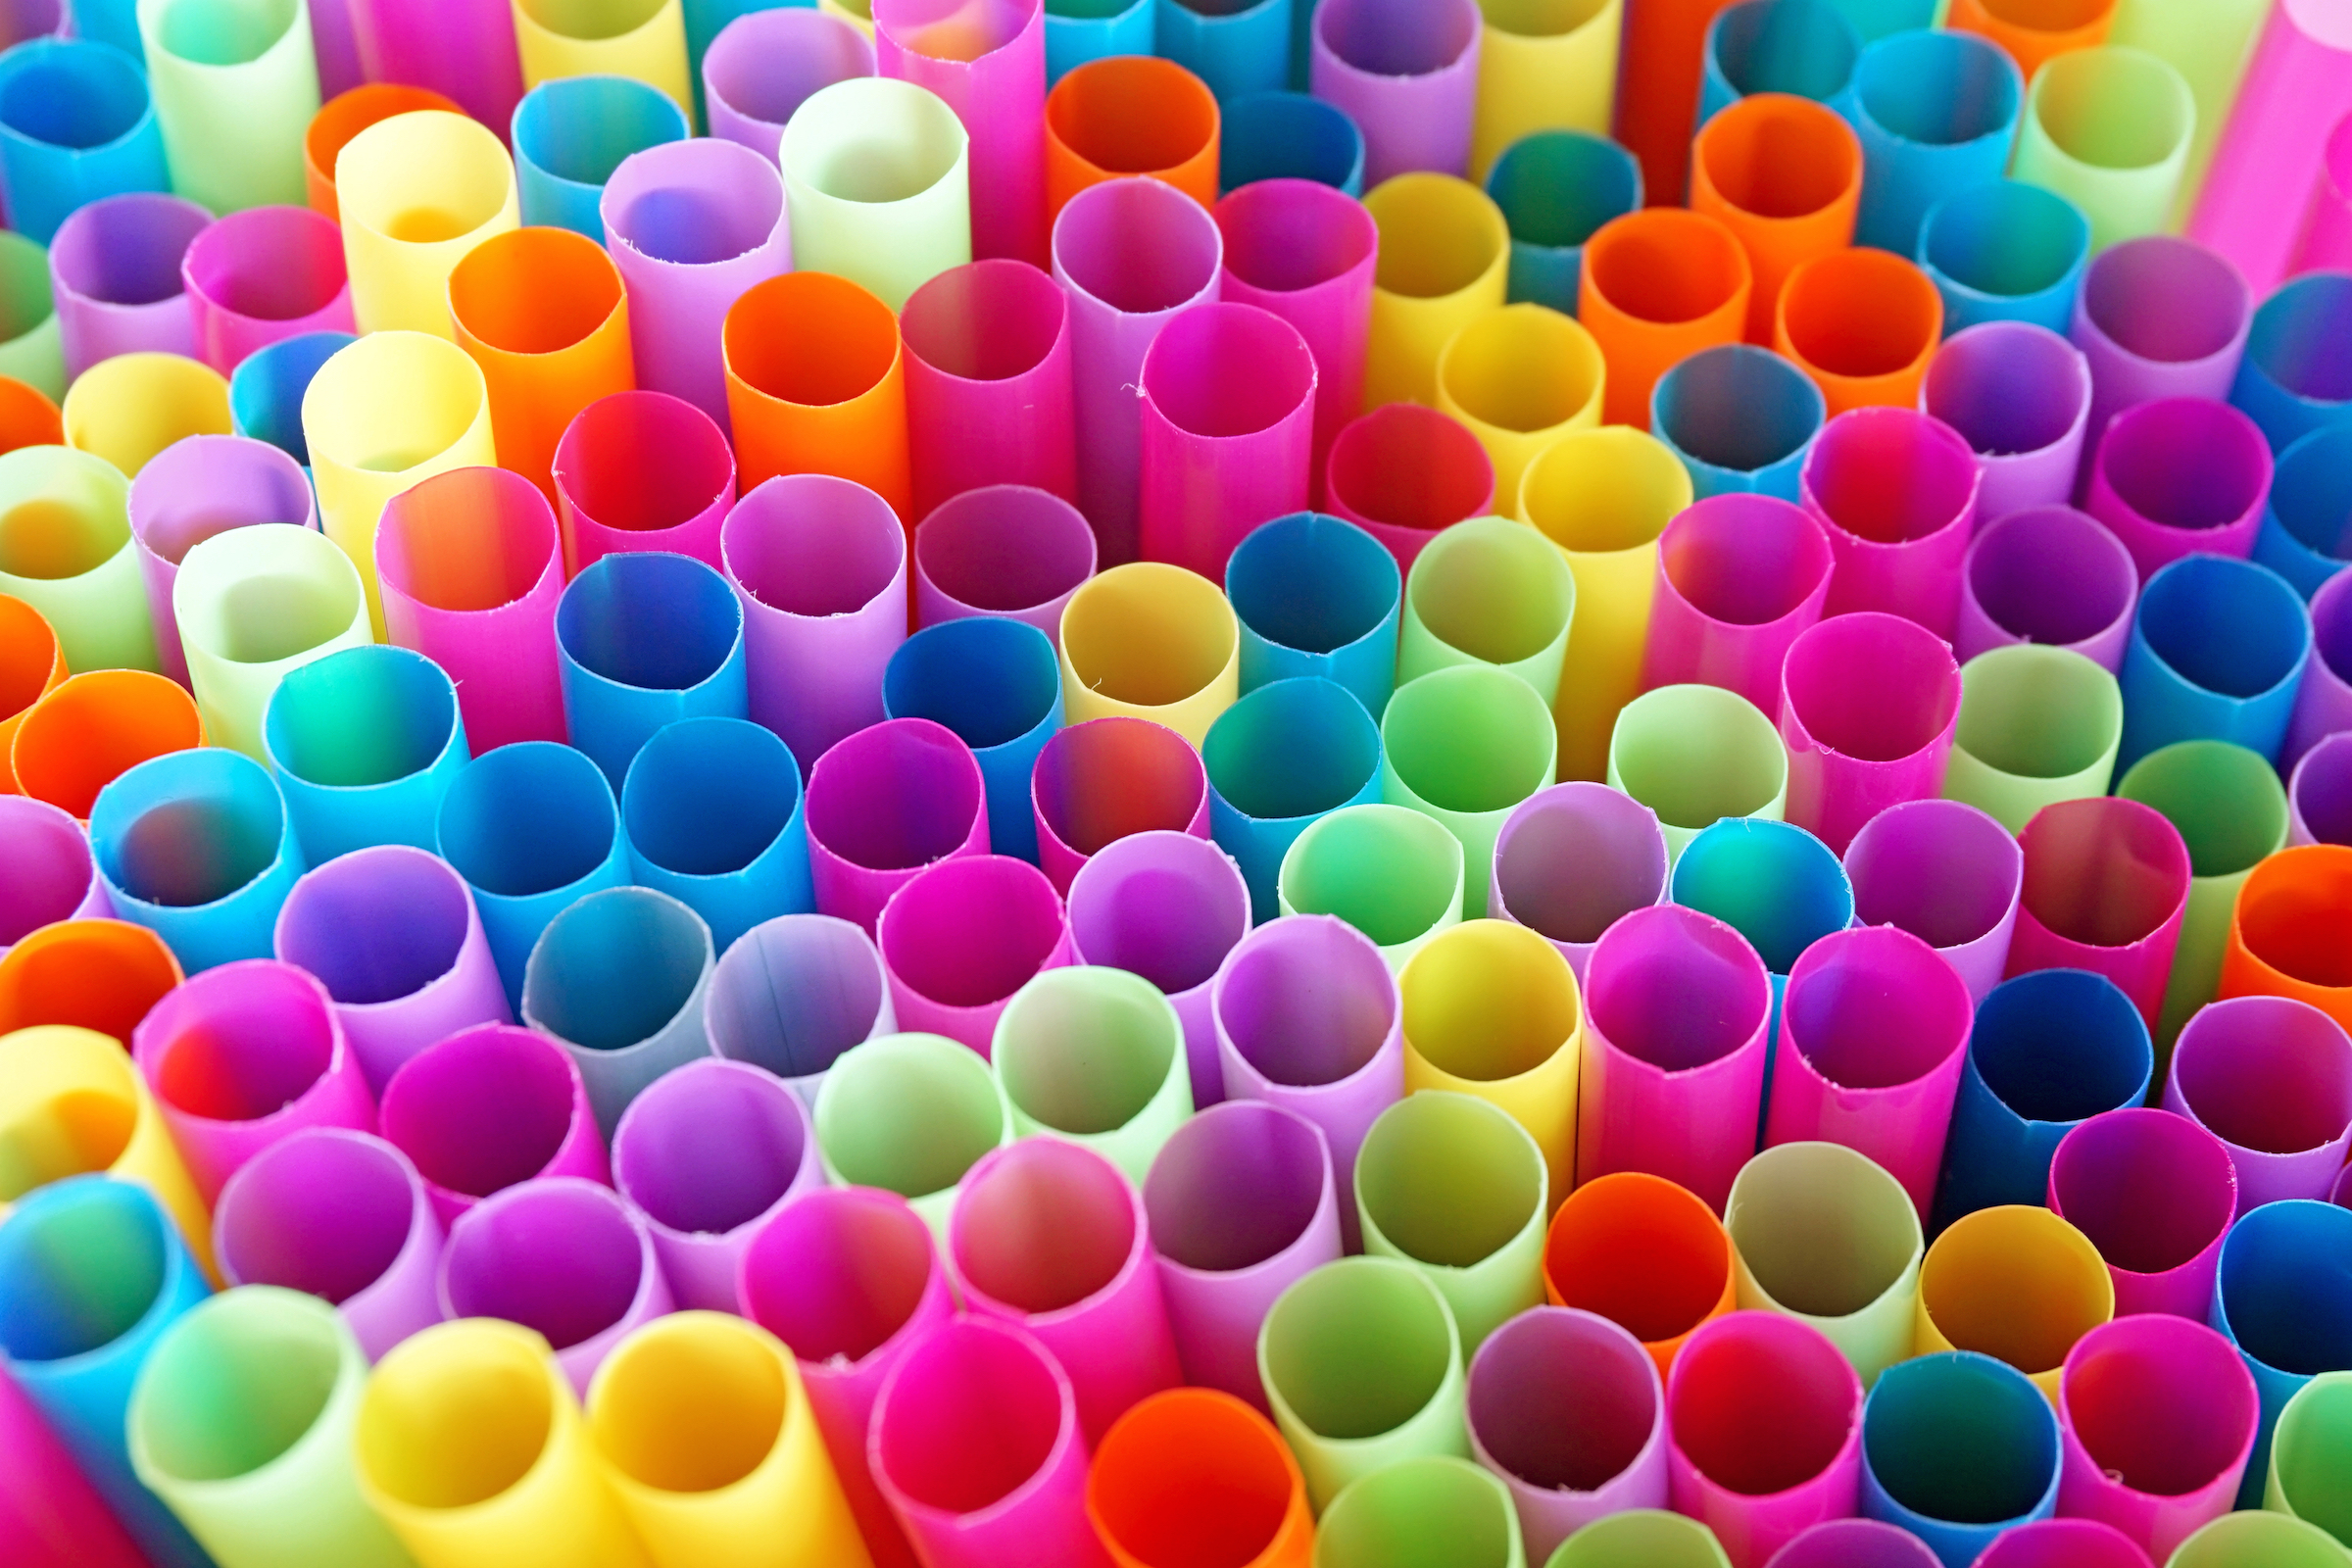 A bundle of colorful, paralell drinking straws.